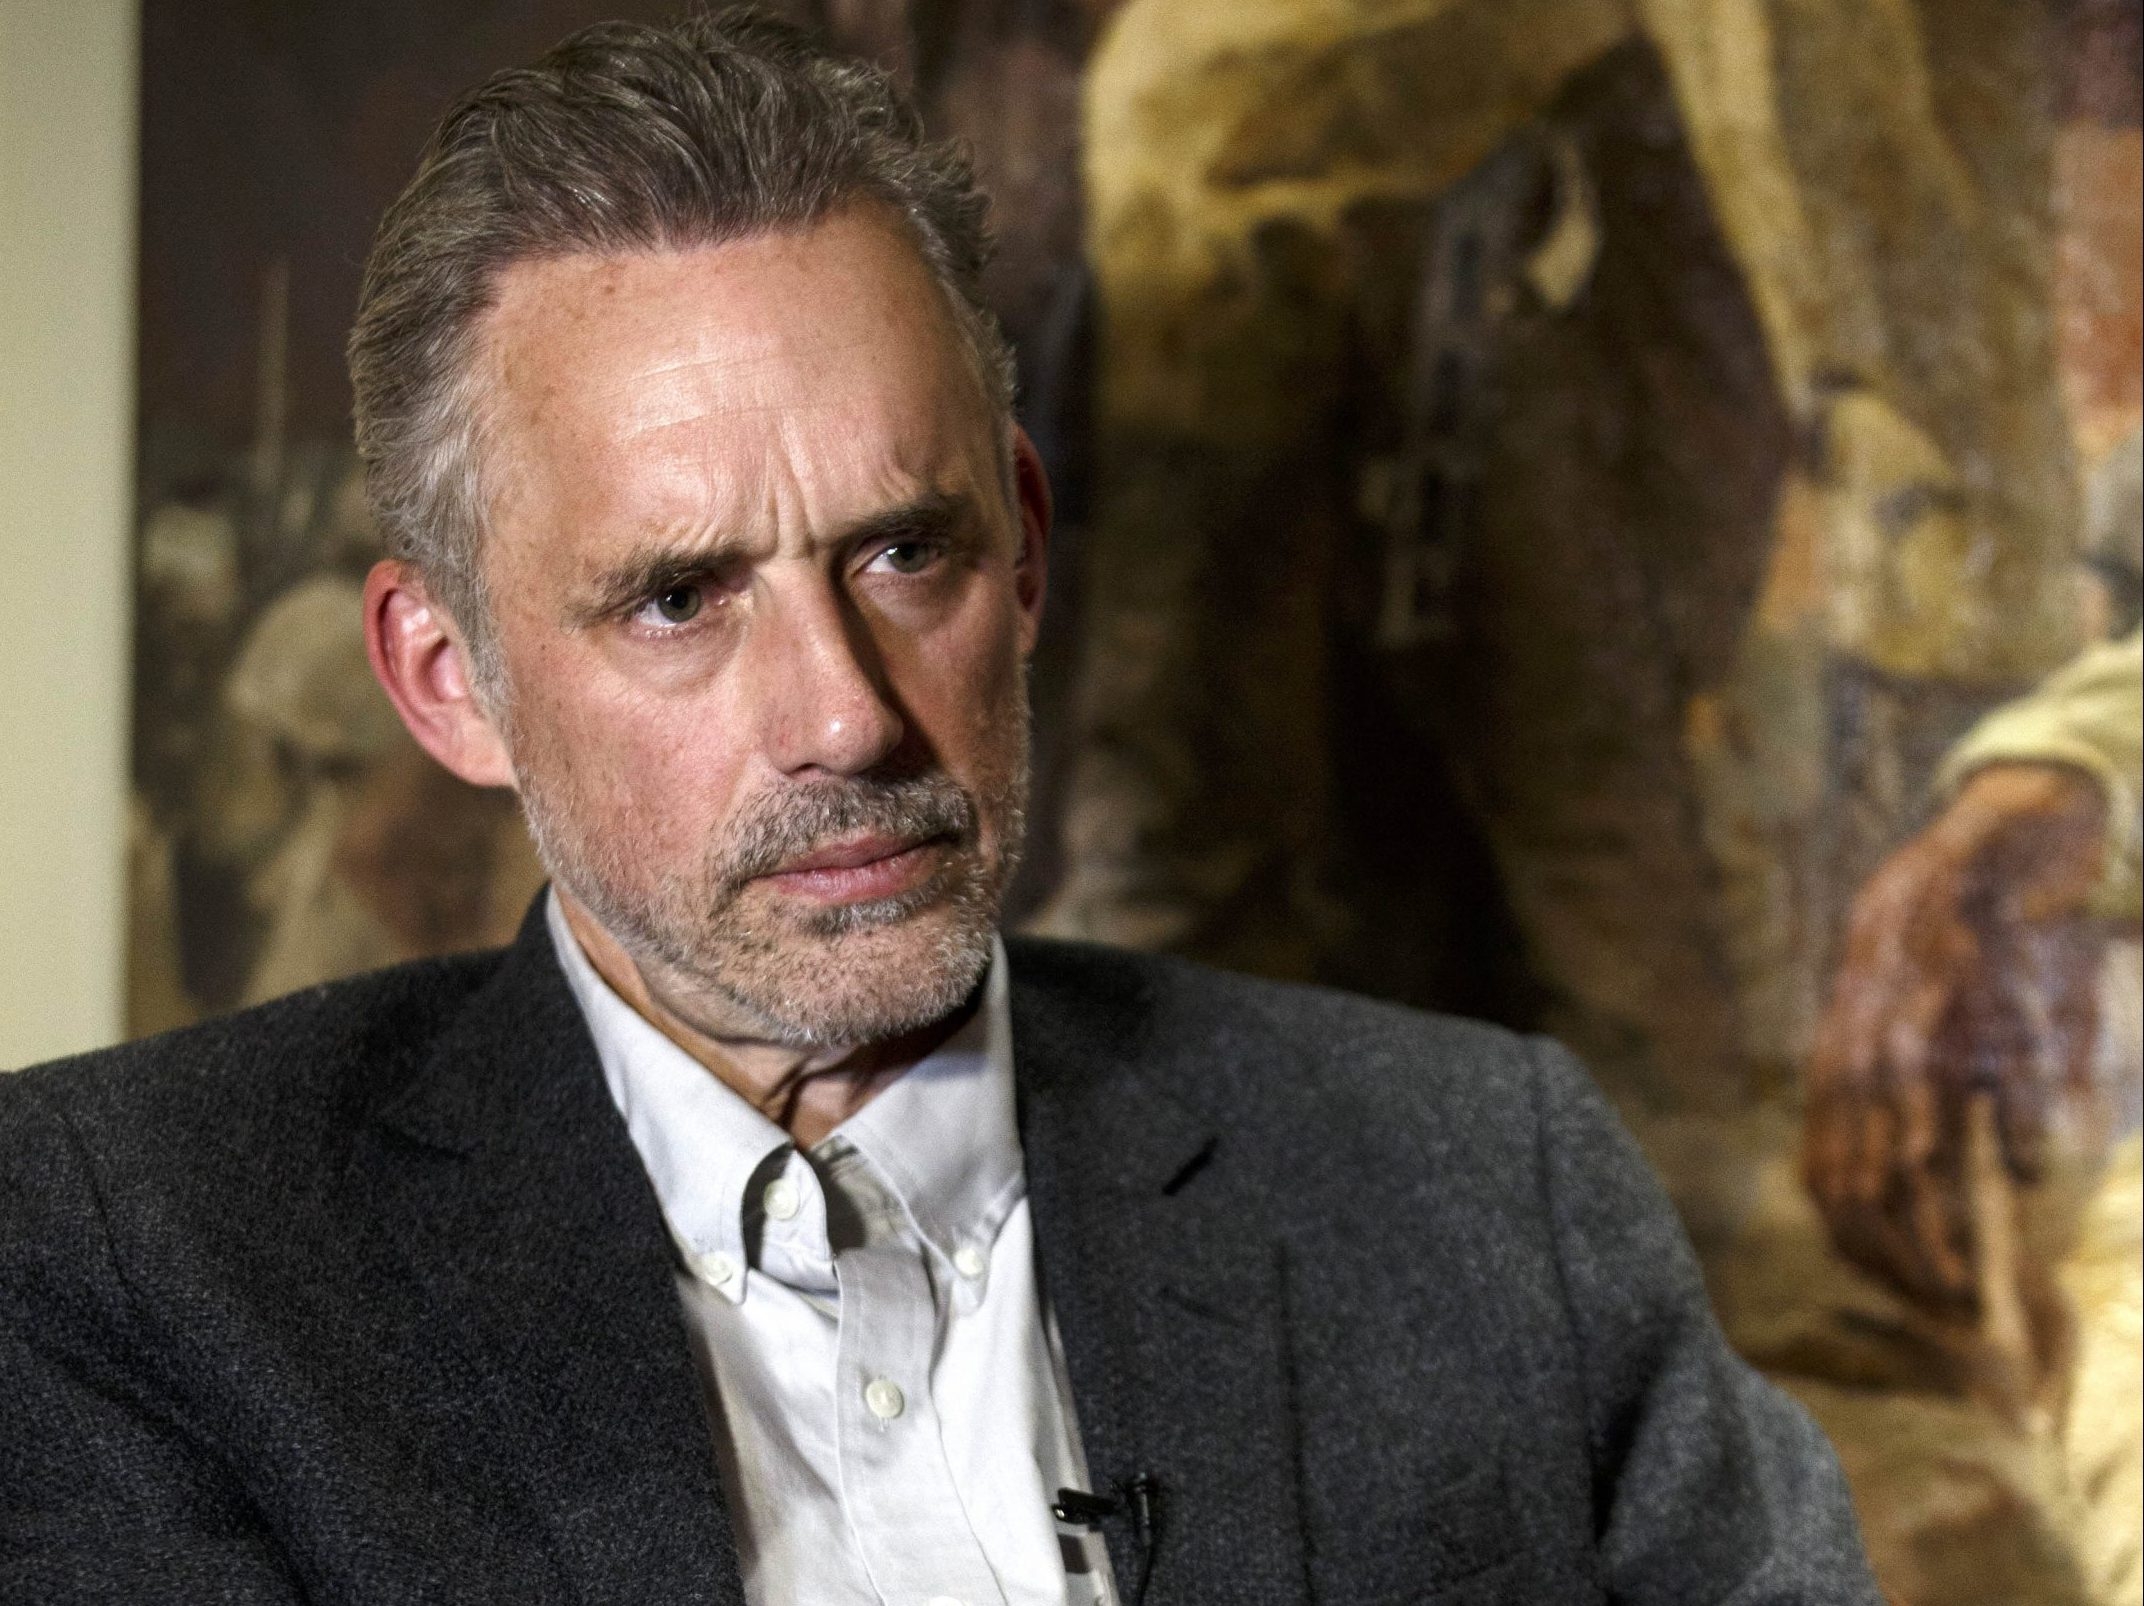 WARMINGTON: Haters trying to cancel Dr. Jordan Peterson received federal grants